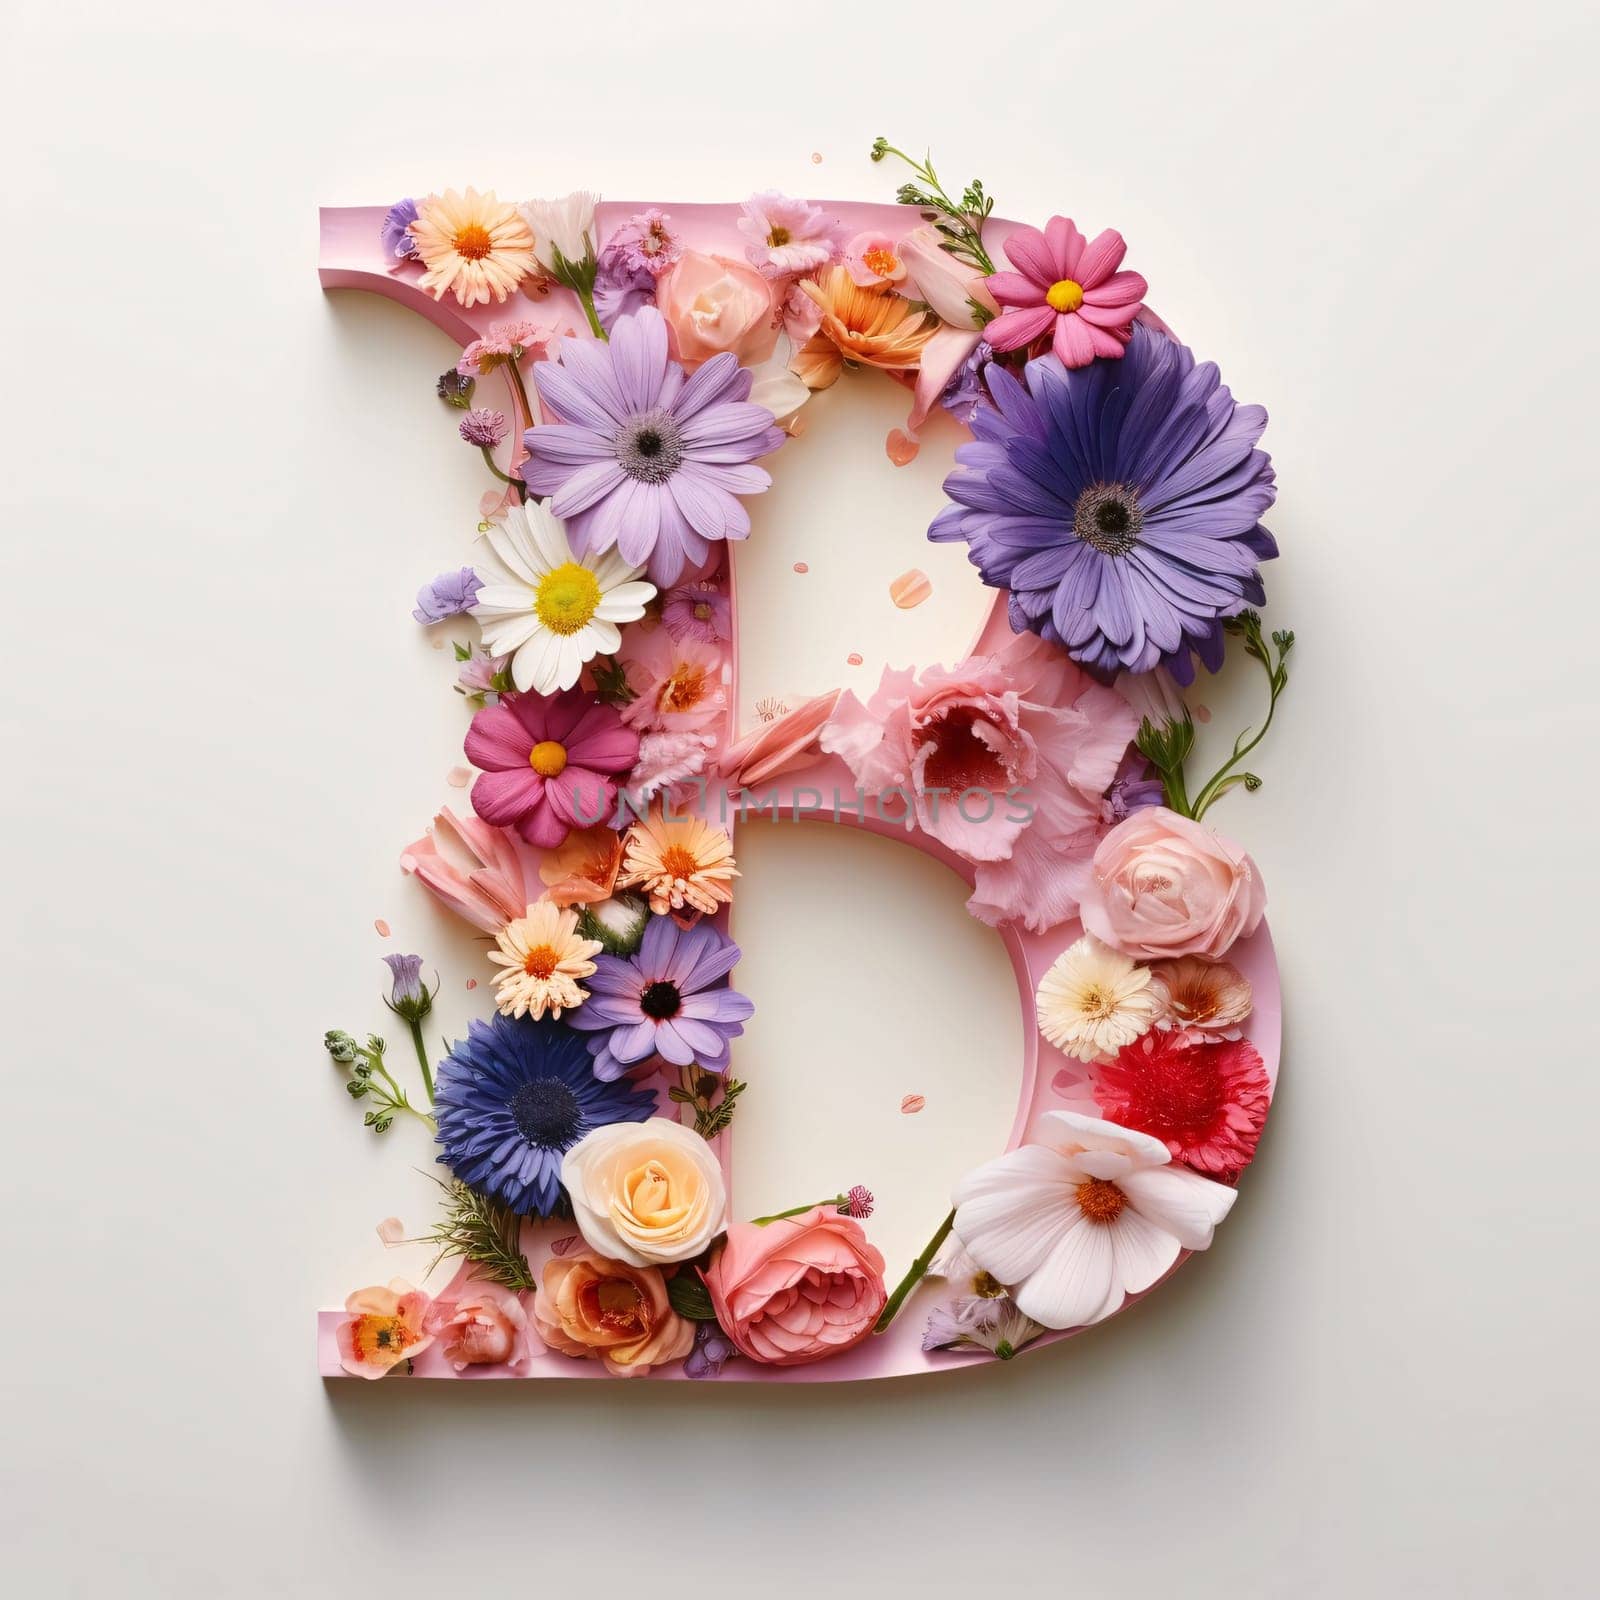 Graphic alphabet letters: Letter B made of flowers on white background. Floral alphabet.